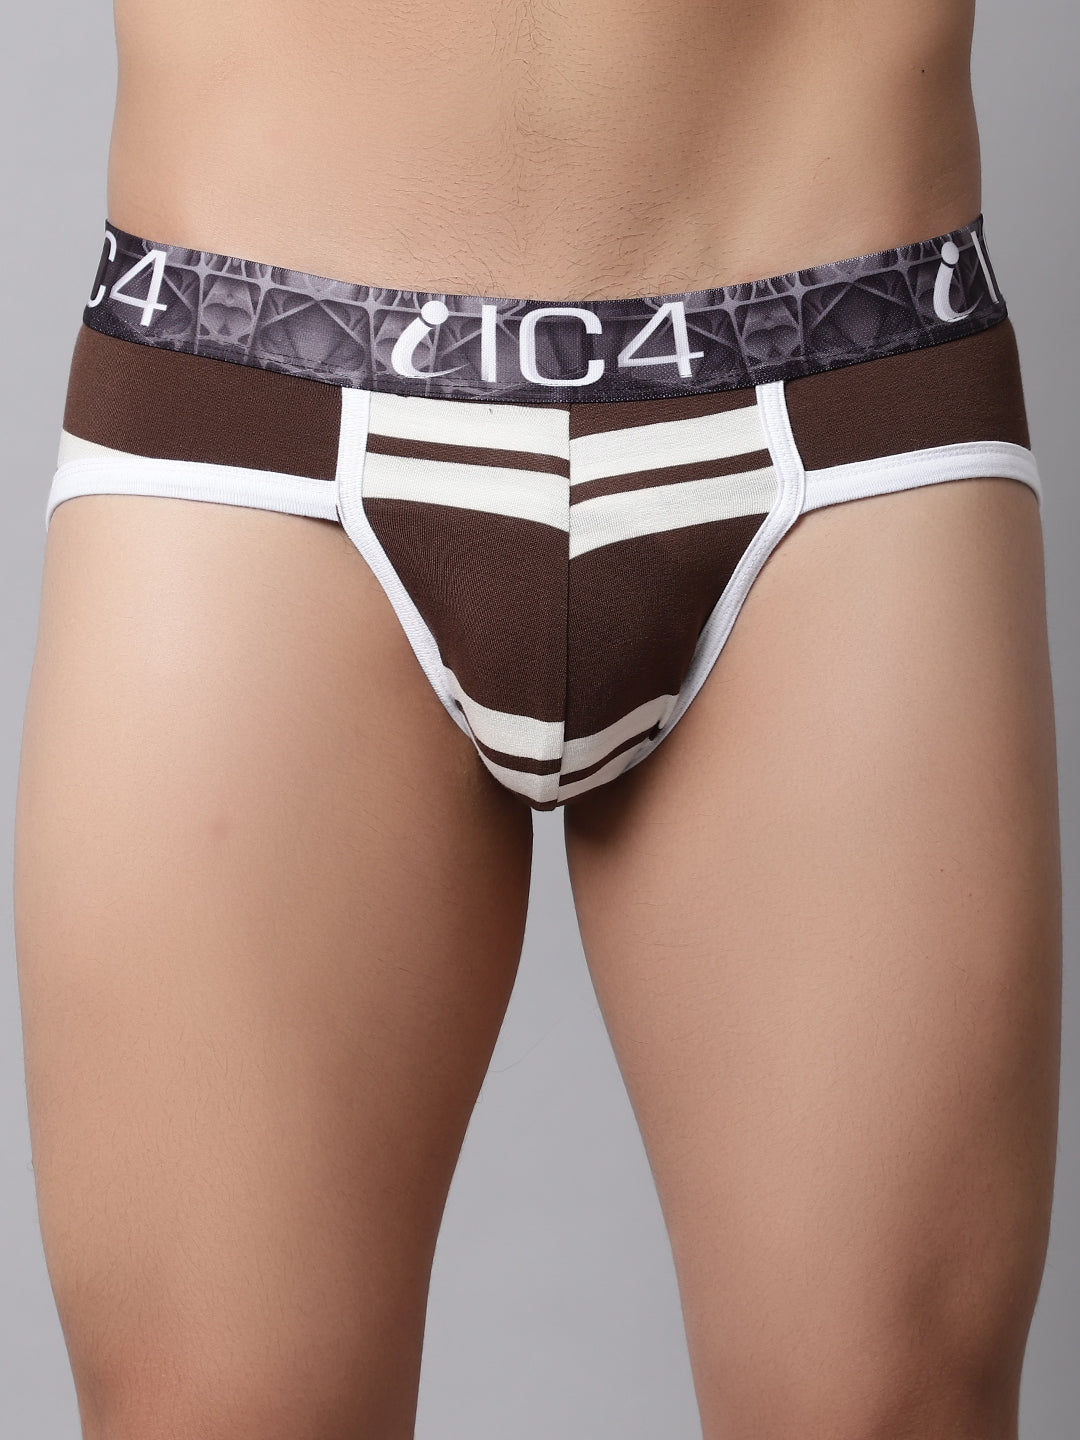 IC4 Men's Modal stripe brief Combo Pack of 2